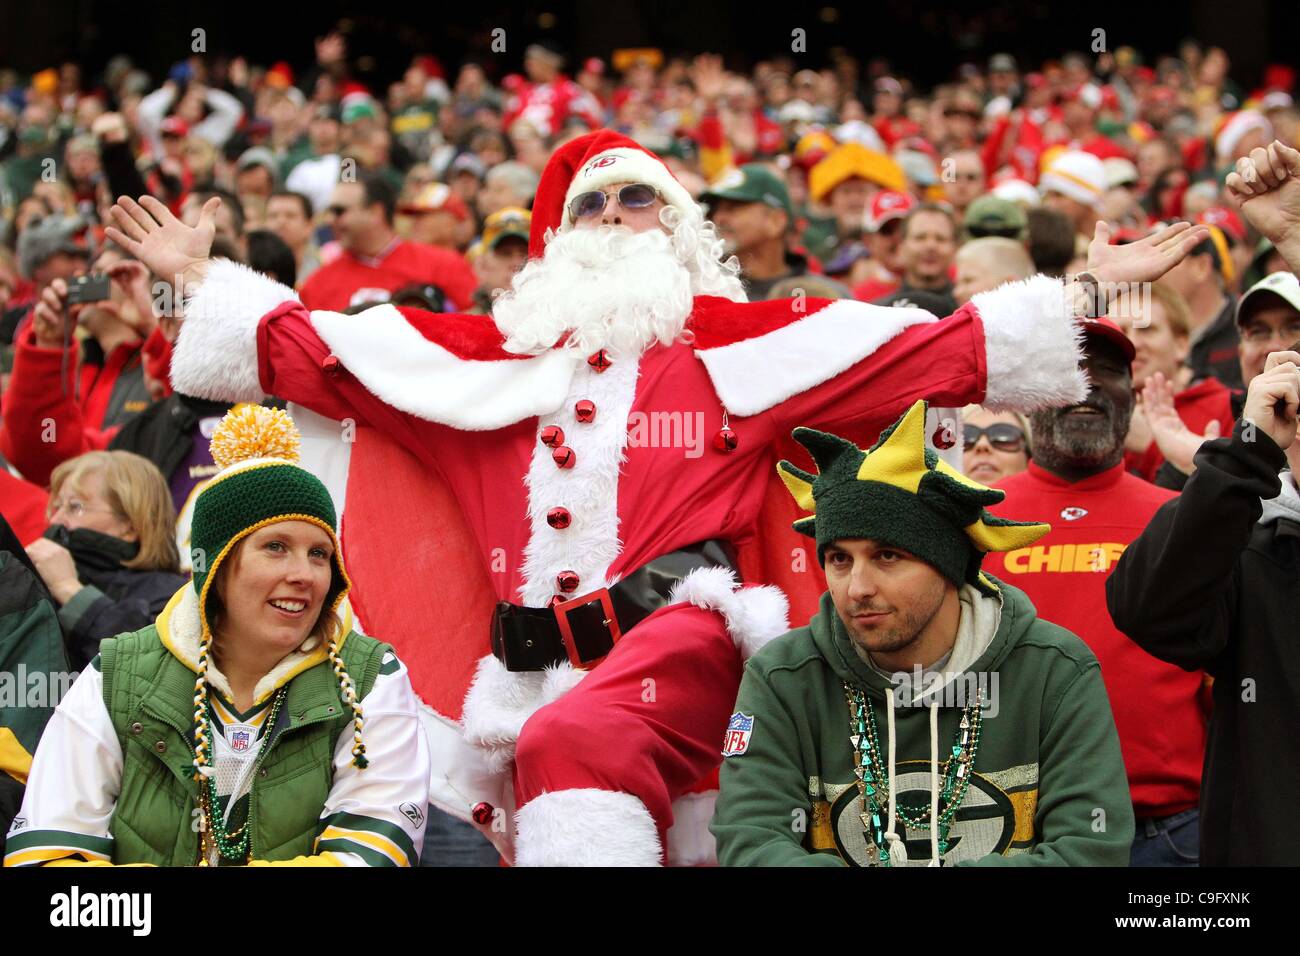 Dec. 18, 2011 - Kansas City, Missouri, United States of America - A Kansas City Chiefs fan dressed as Santa Clause celebrates the Chiefs' victory between two dejected Green Bay Packers fans. The Kansas City Chiefs defeat the Green Bay Packers 19-14 in the game at Arrowhead Stadium. (Credit Image: ©  Stock Photo